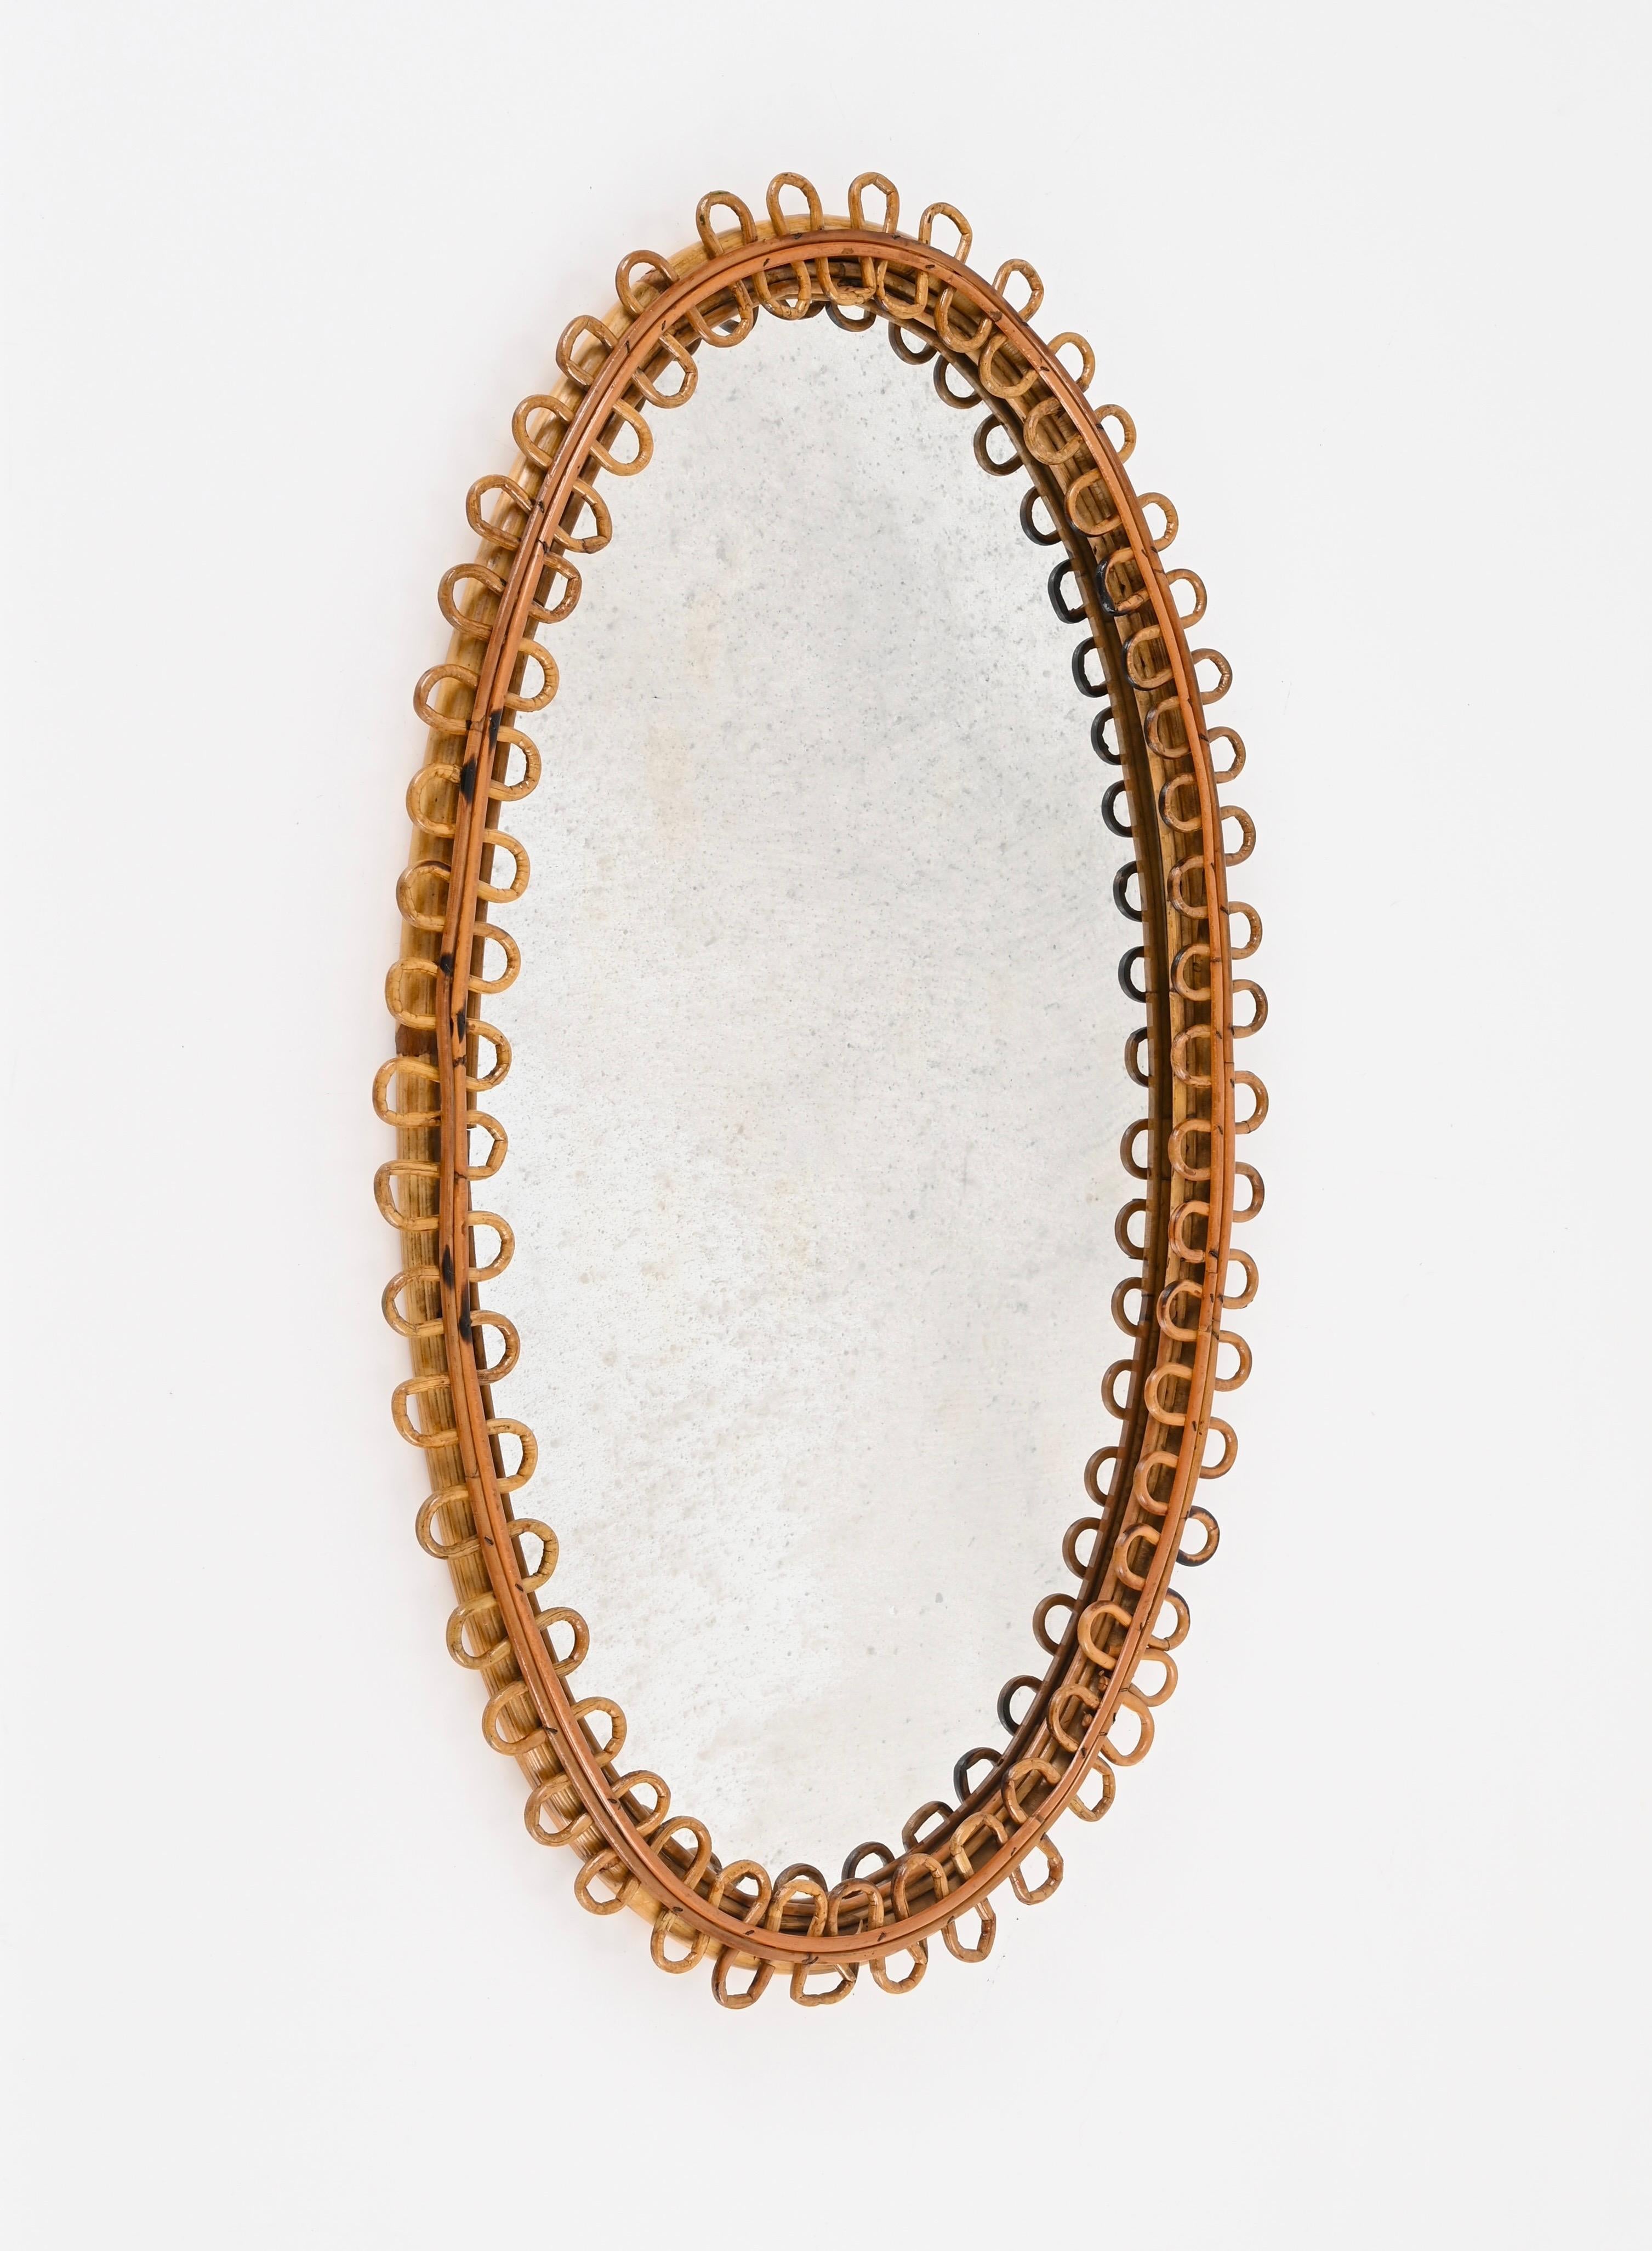 Hand-Crafted Midcentury French Riviera Oval Mirror in Curved Rattan and Bamboo, Italy 1960s